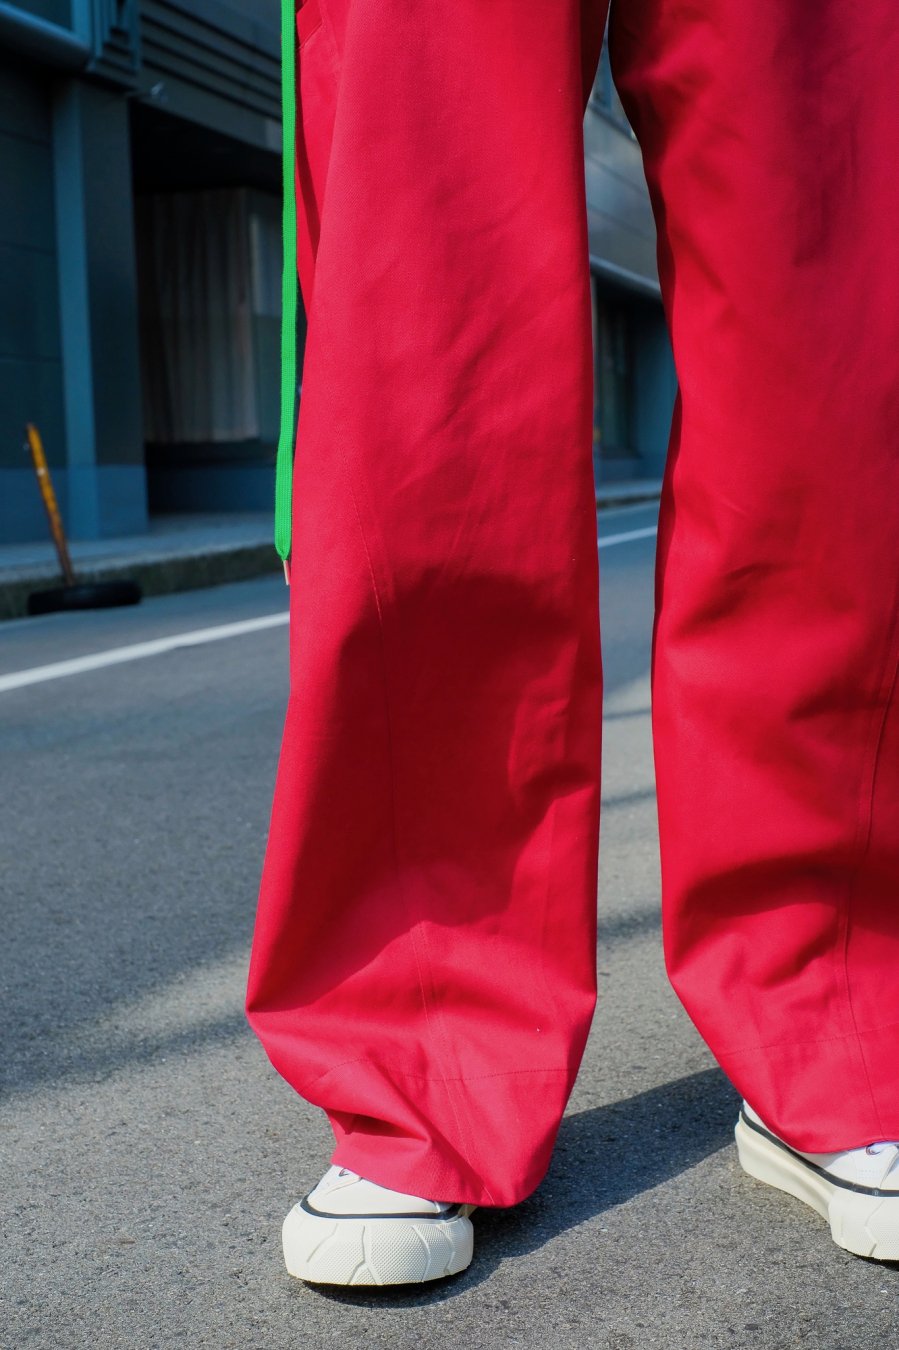 MASU（エムエーエスユー）のCOTTON WIDE TROUSERS REDの通販サイト 